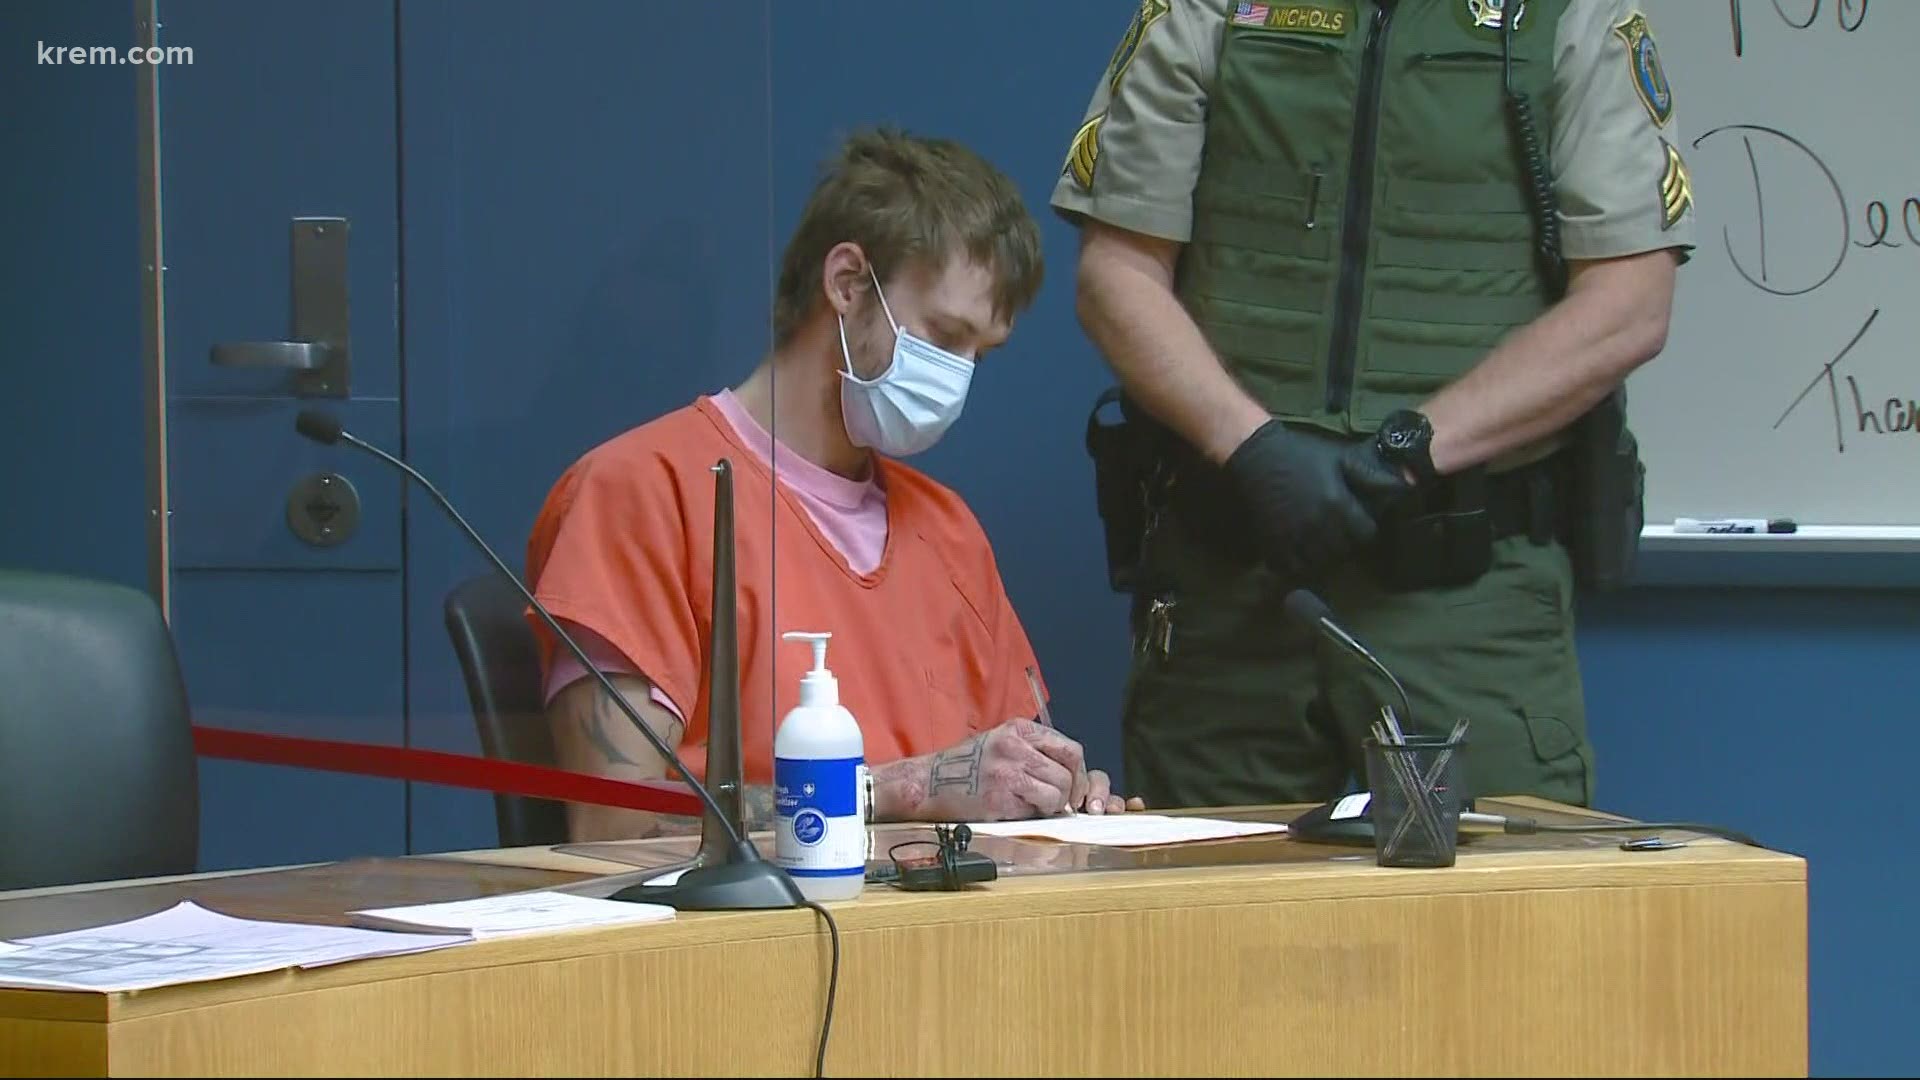 Riley Hillestad was formally charged on Tuesday with nine different counts in connection to Fox's murder. His bail was set at $1 million.